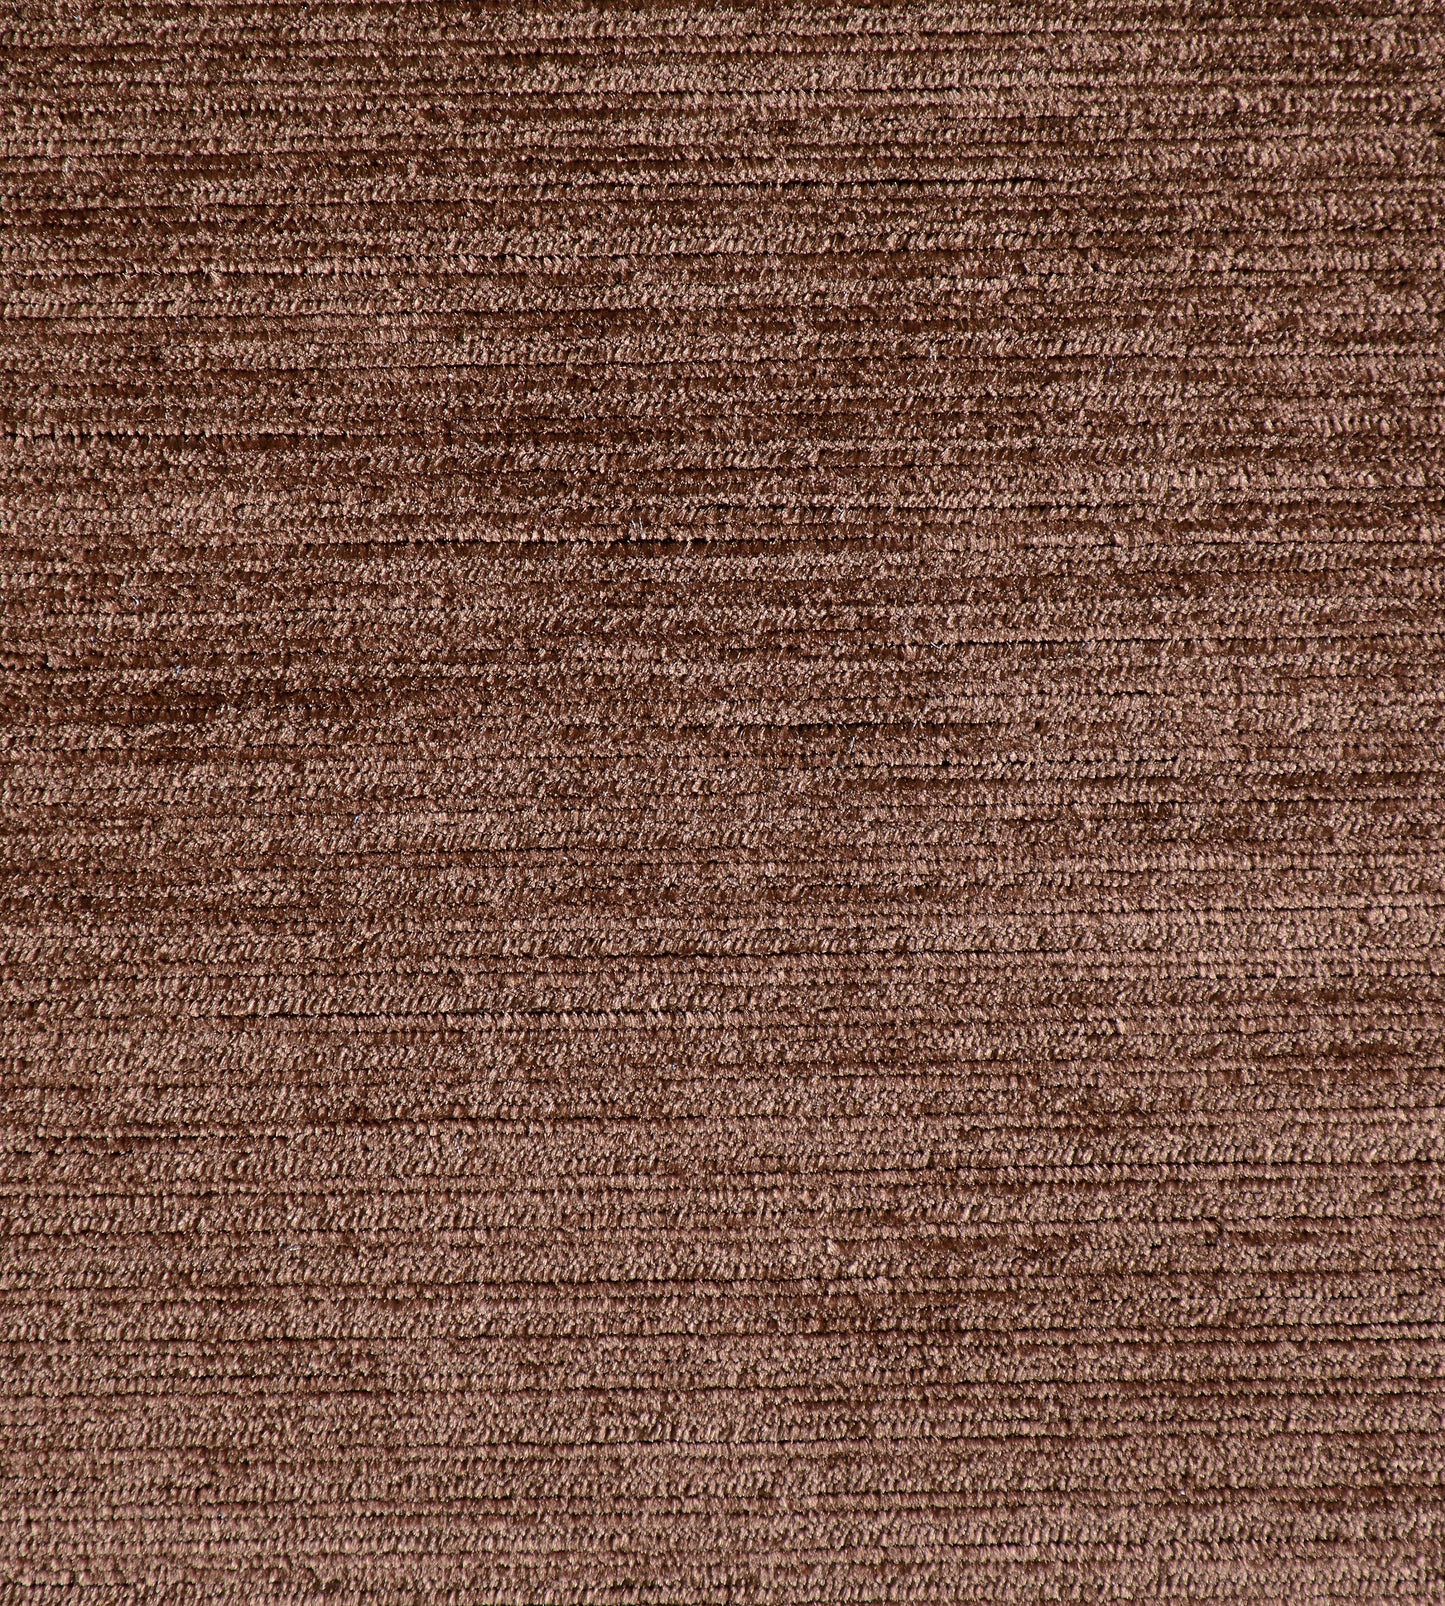 Purchase Old World Weavers Fabric Product VP 0565NOBE, Nobel Coffee Bean 1